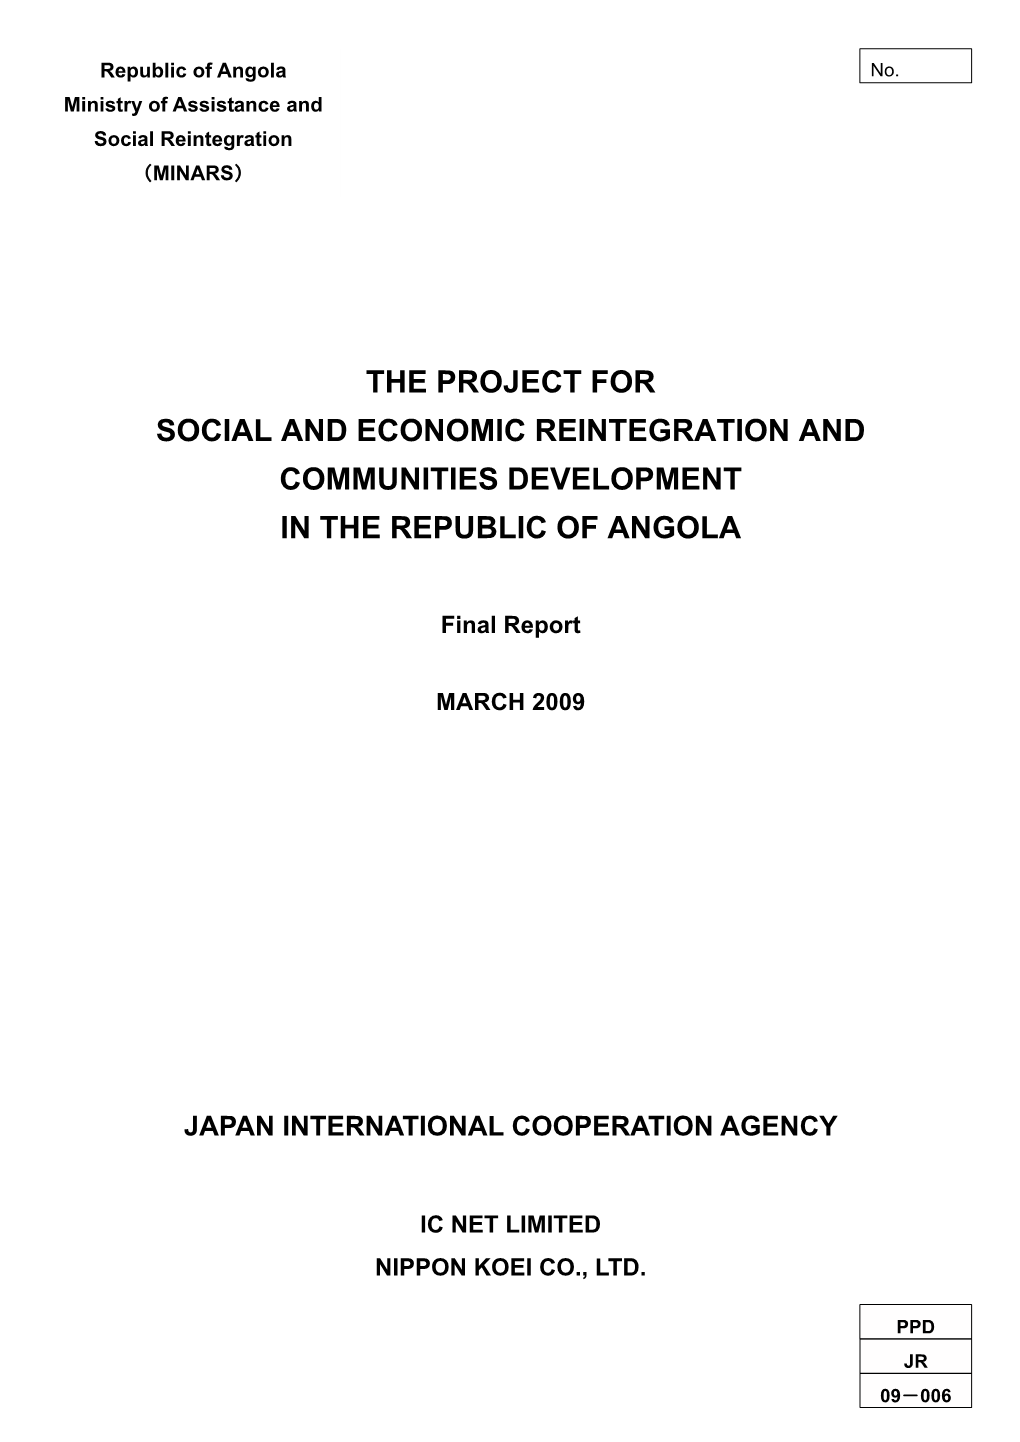 The Project for Social and Economic Reintegration and Communities Development in the Republic of Angola